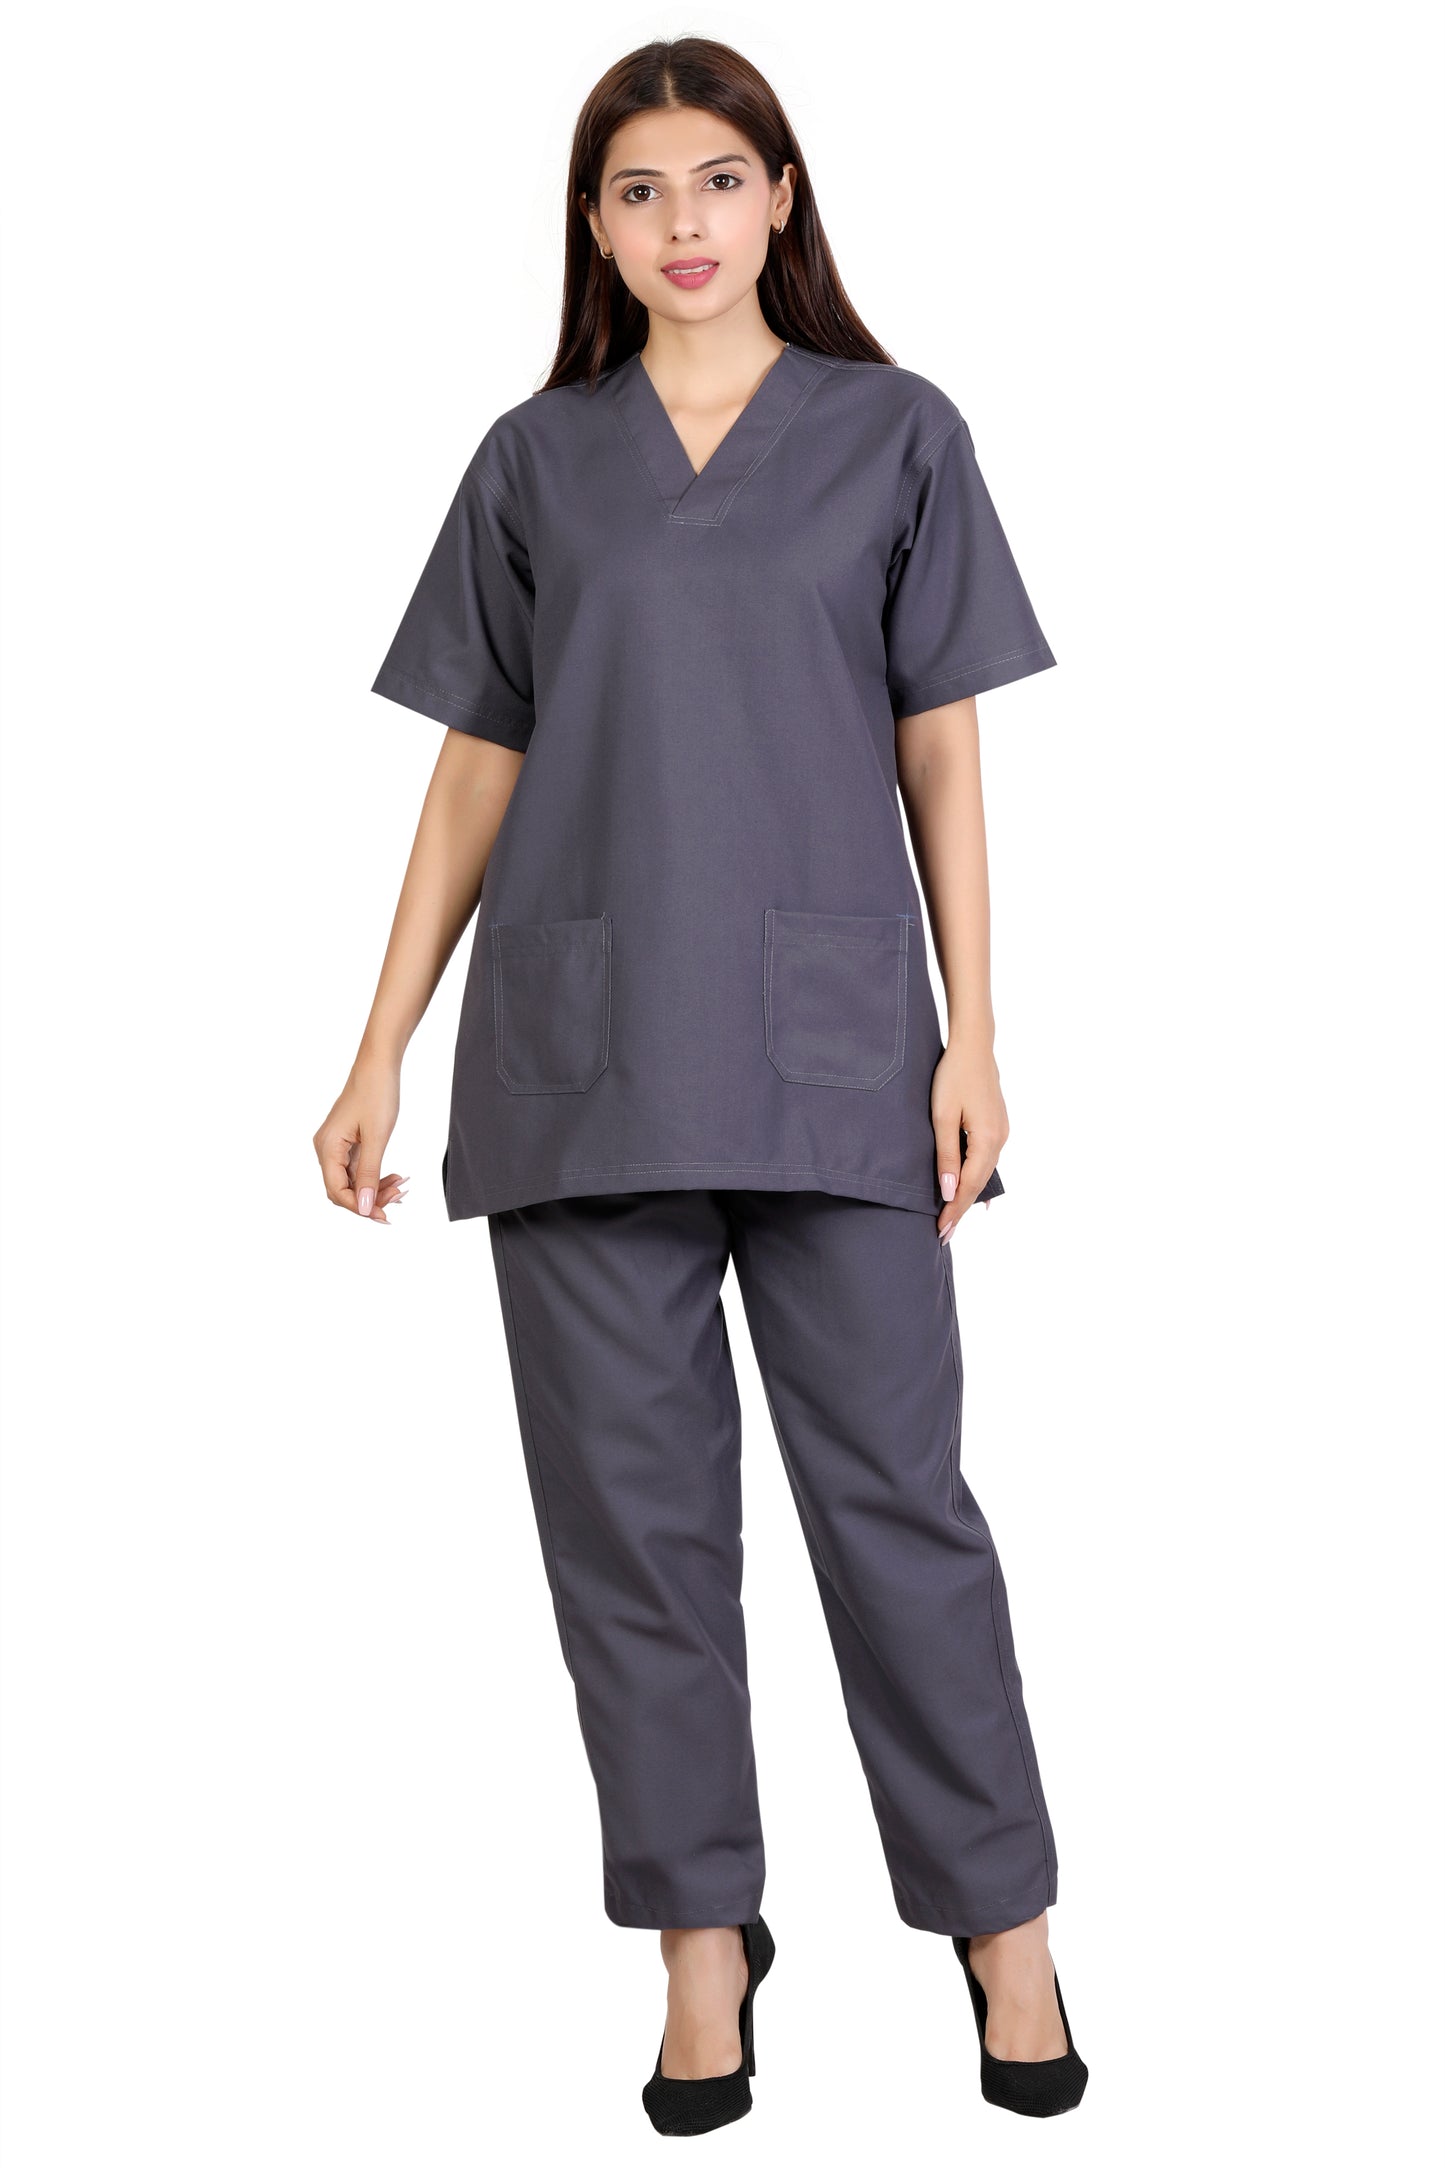 The Ultimate Surgical Scrub Suit Spectrum - Grey